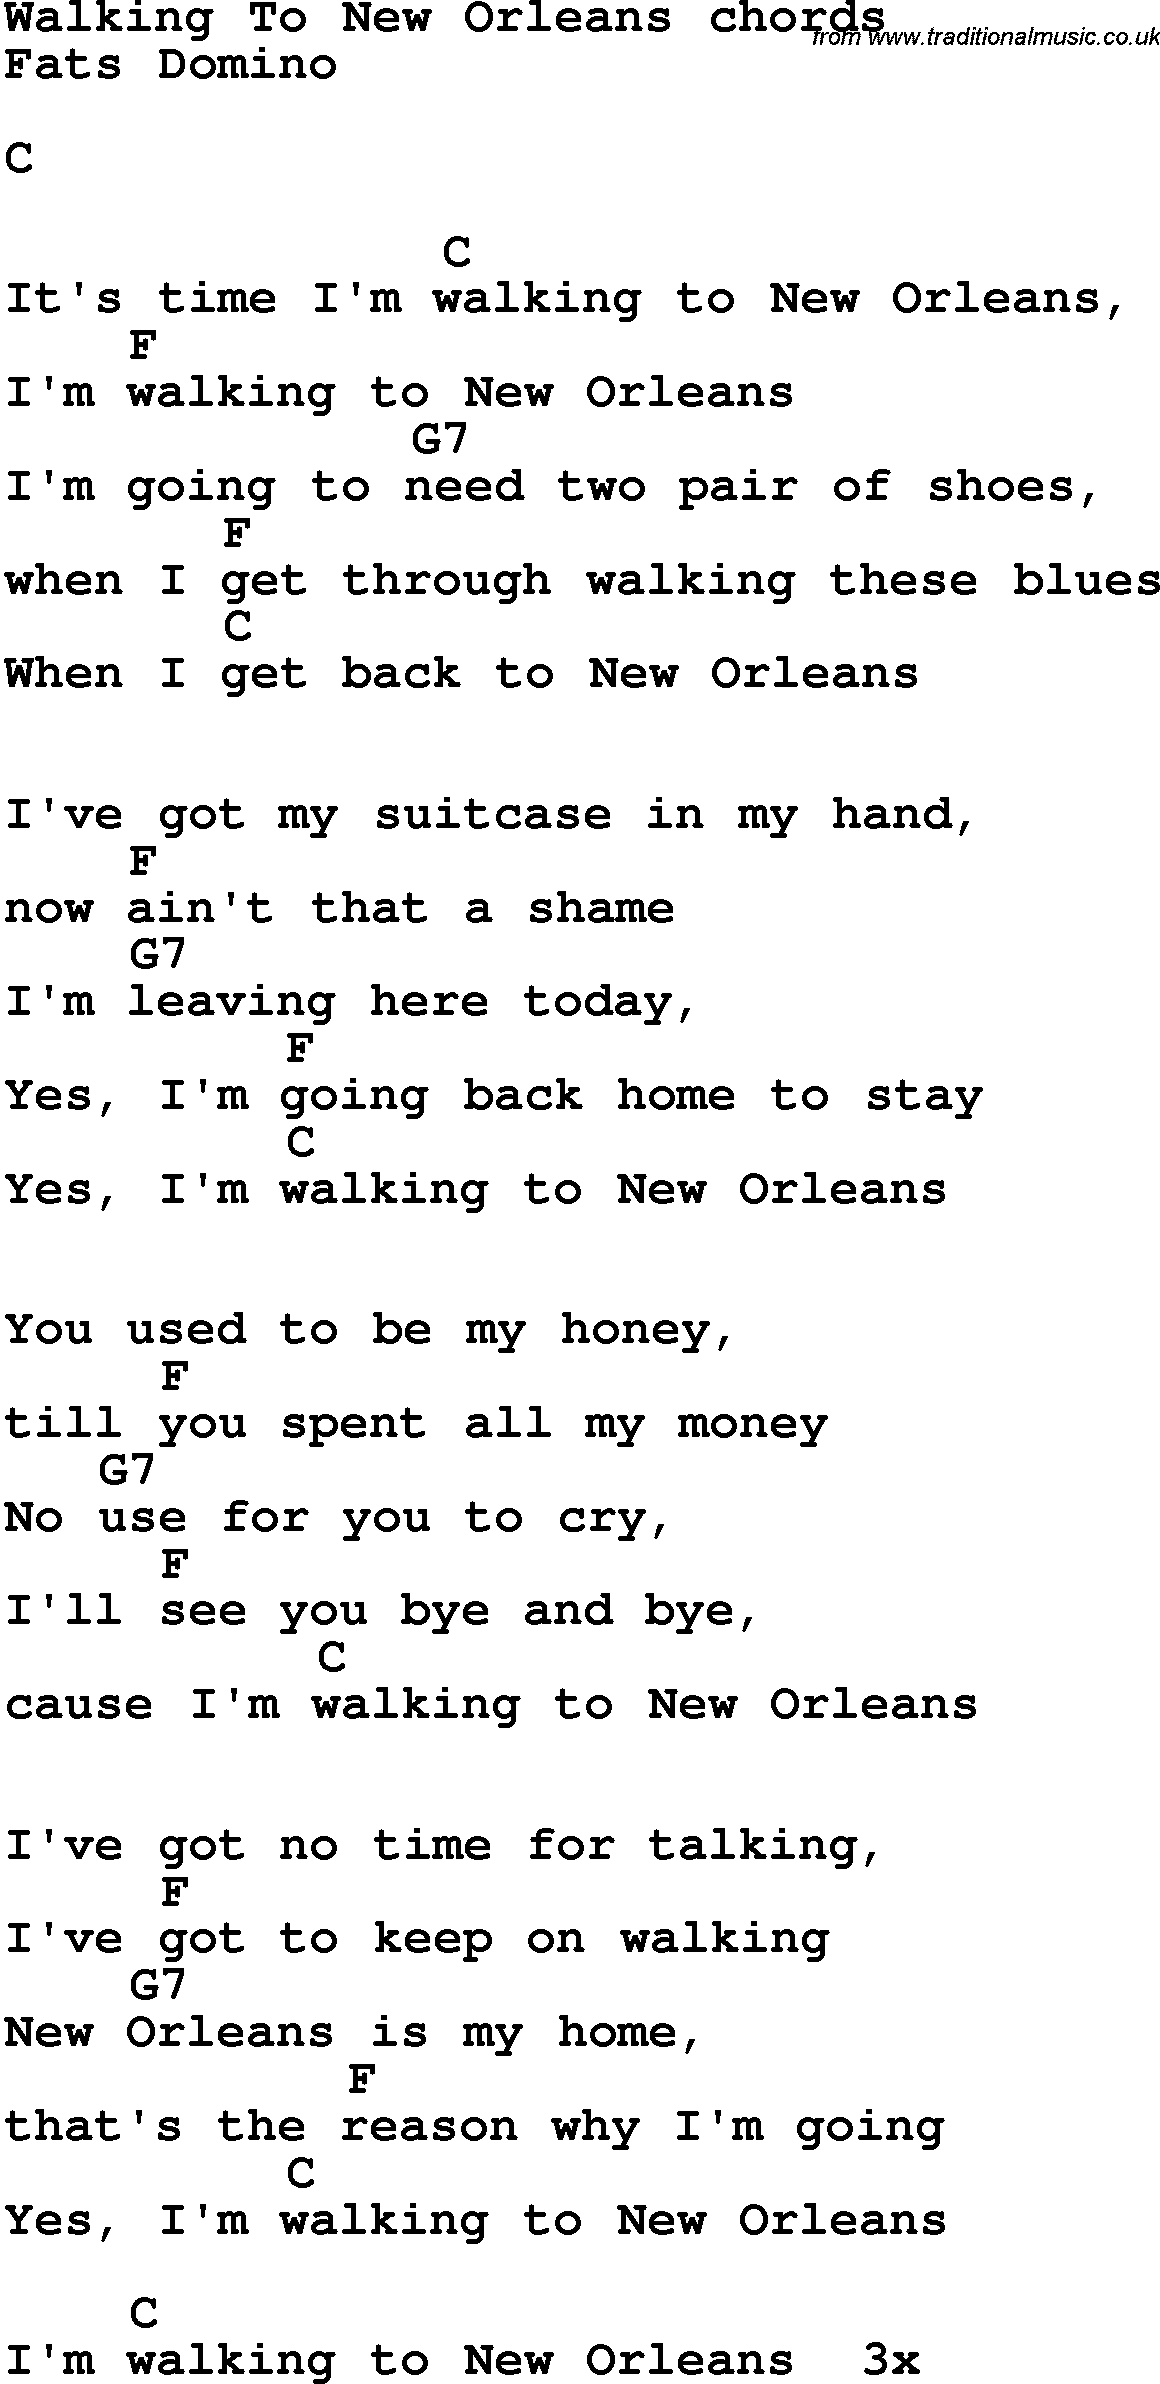 Song Lyrics with guitar chords for Walking To New Orleans